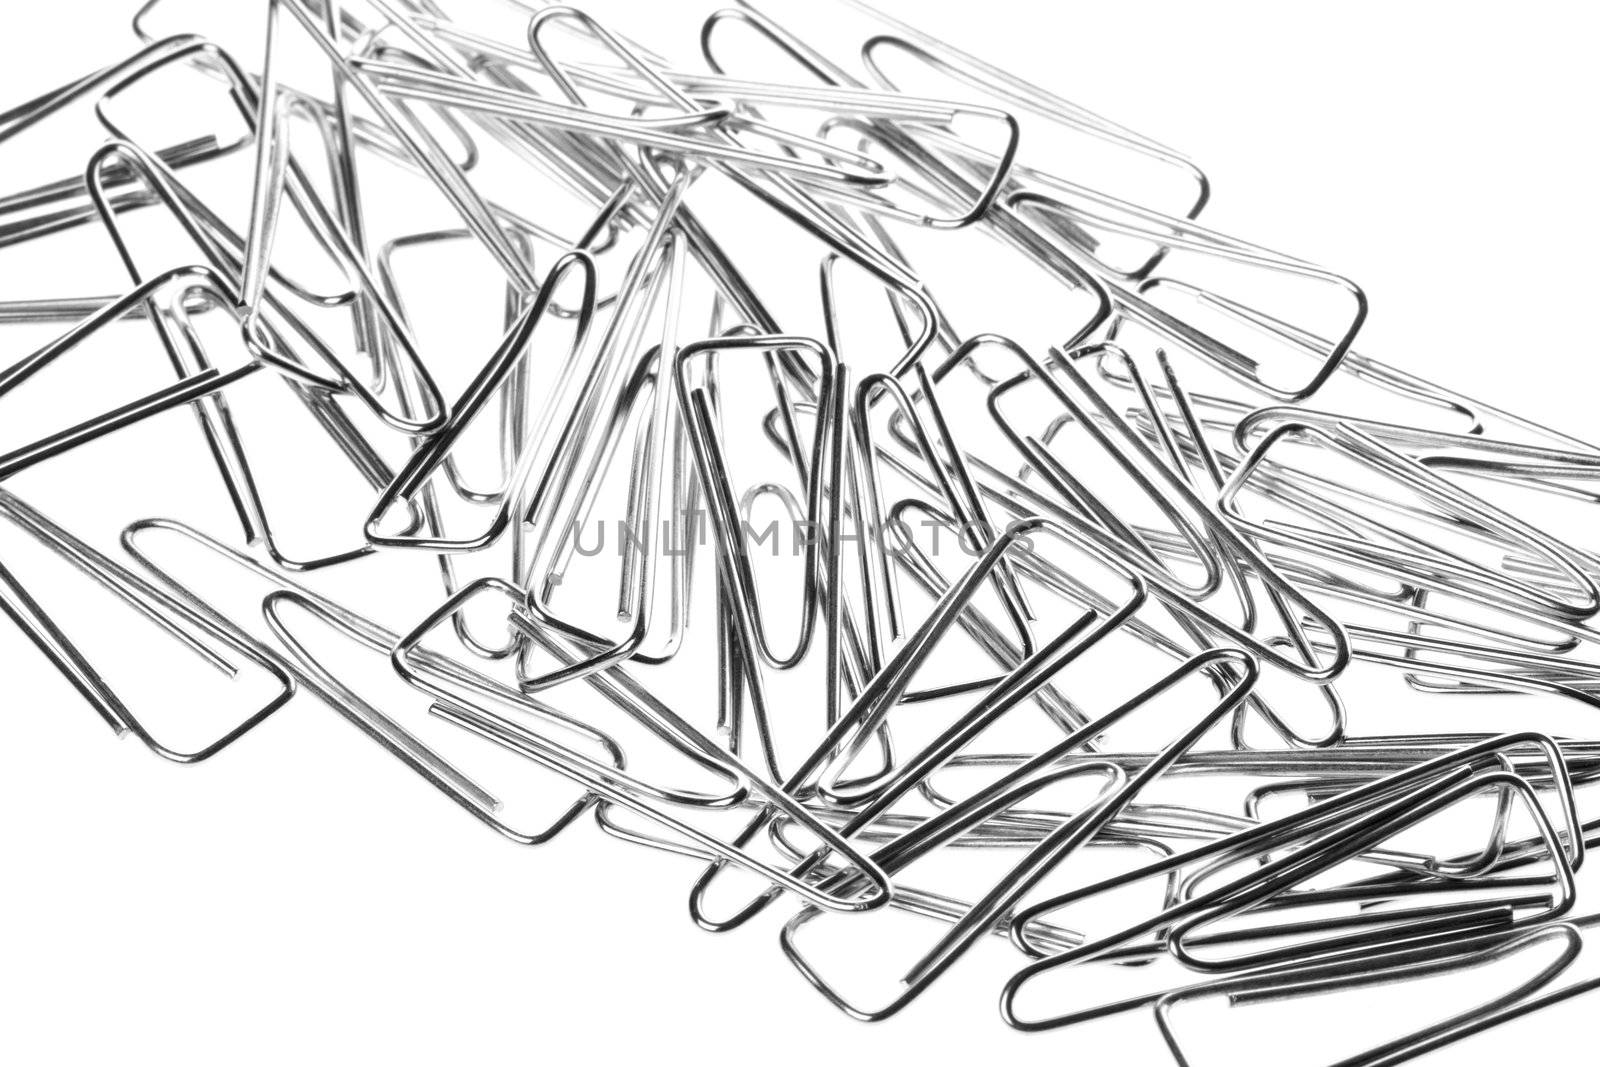 Paper Clips by shariffc